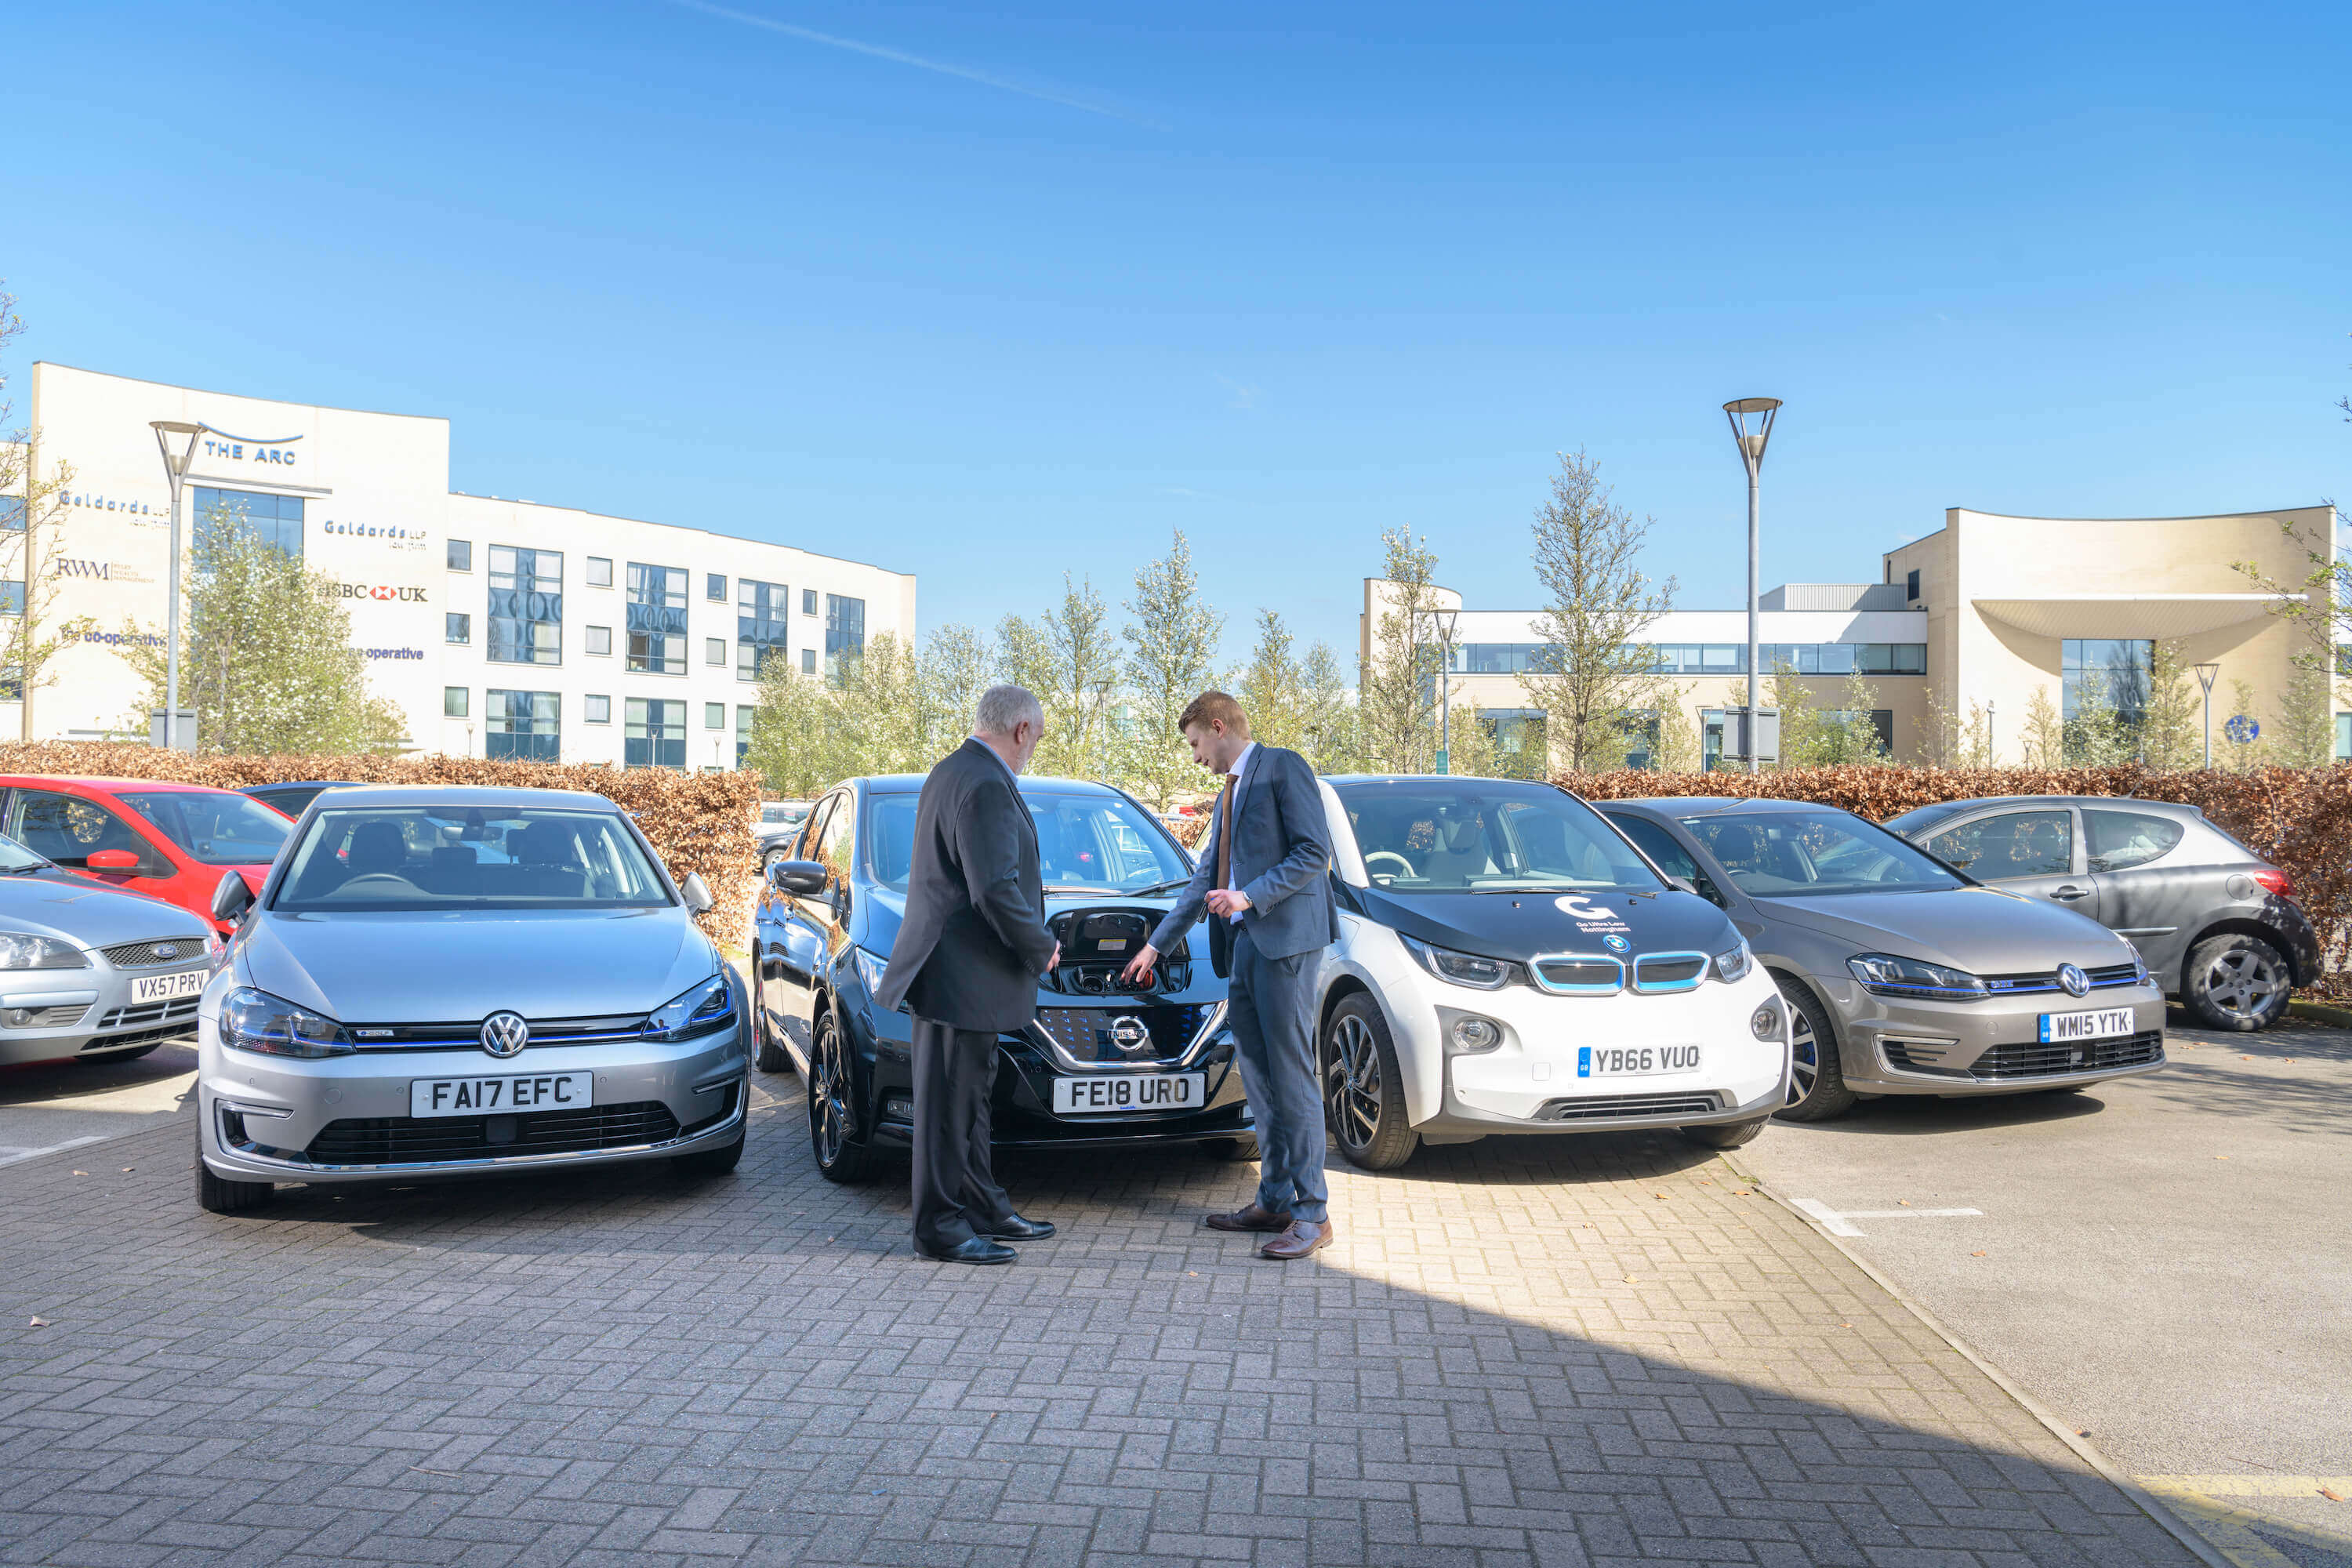 Nottingham businesses are invited to an ‘Electric Vehicle Question Time’ Networking Event on 26 March 2019